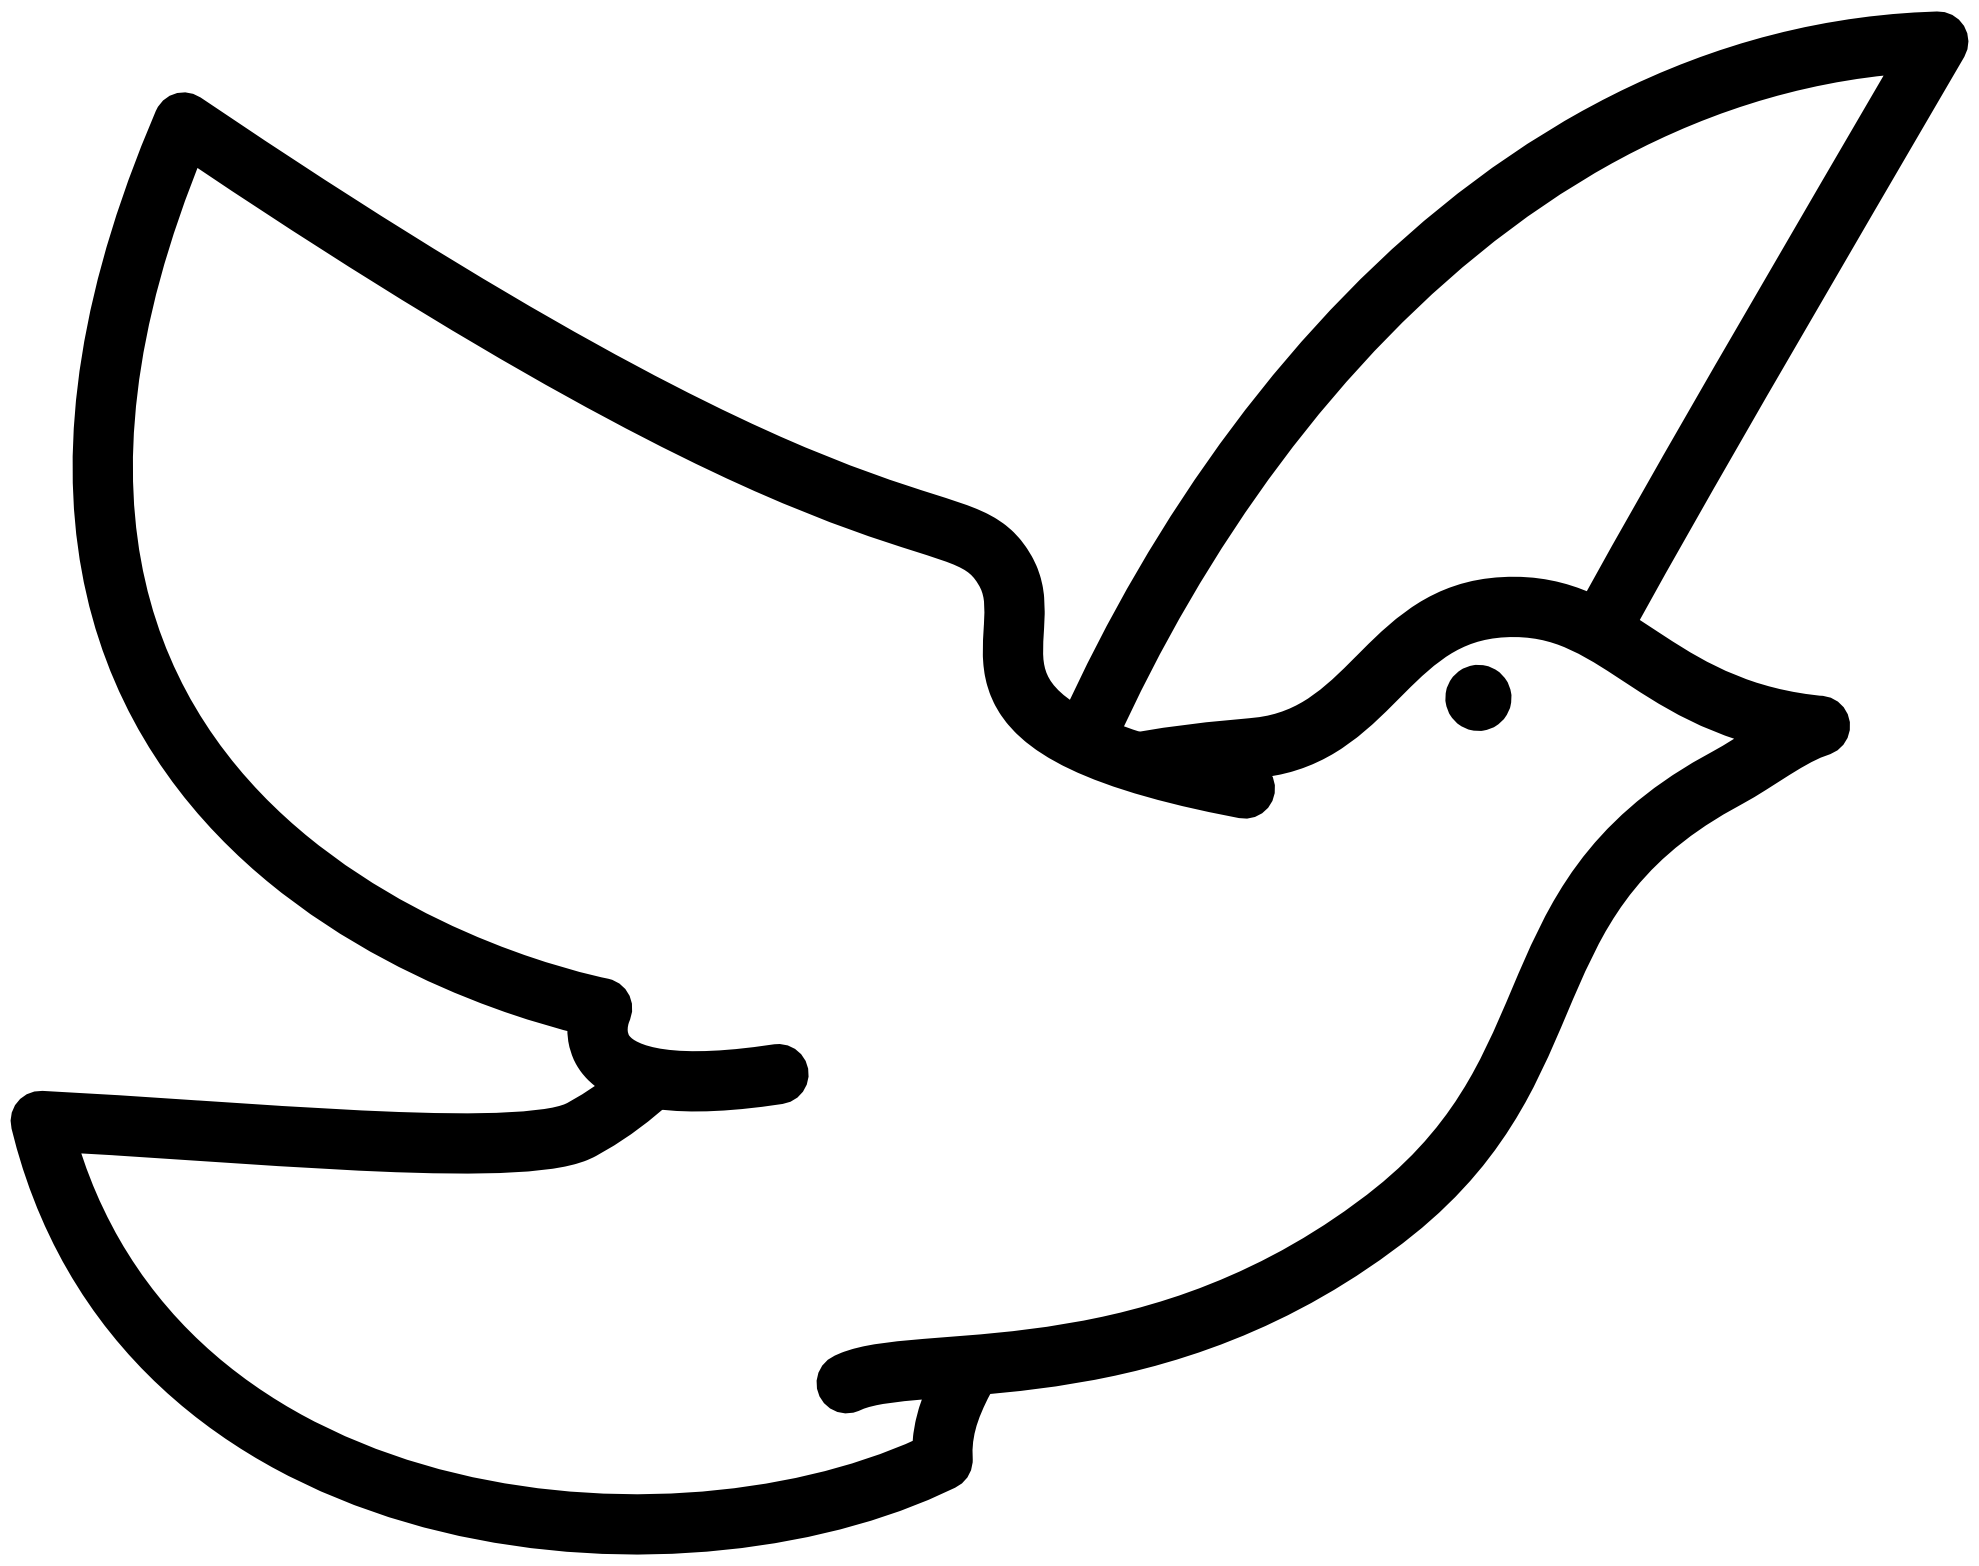 peace dove coloring pages - all the Gallery you need!